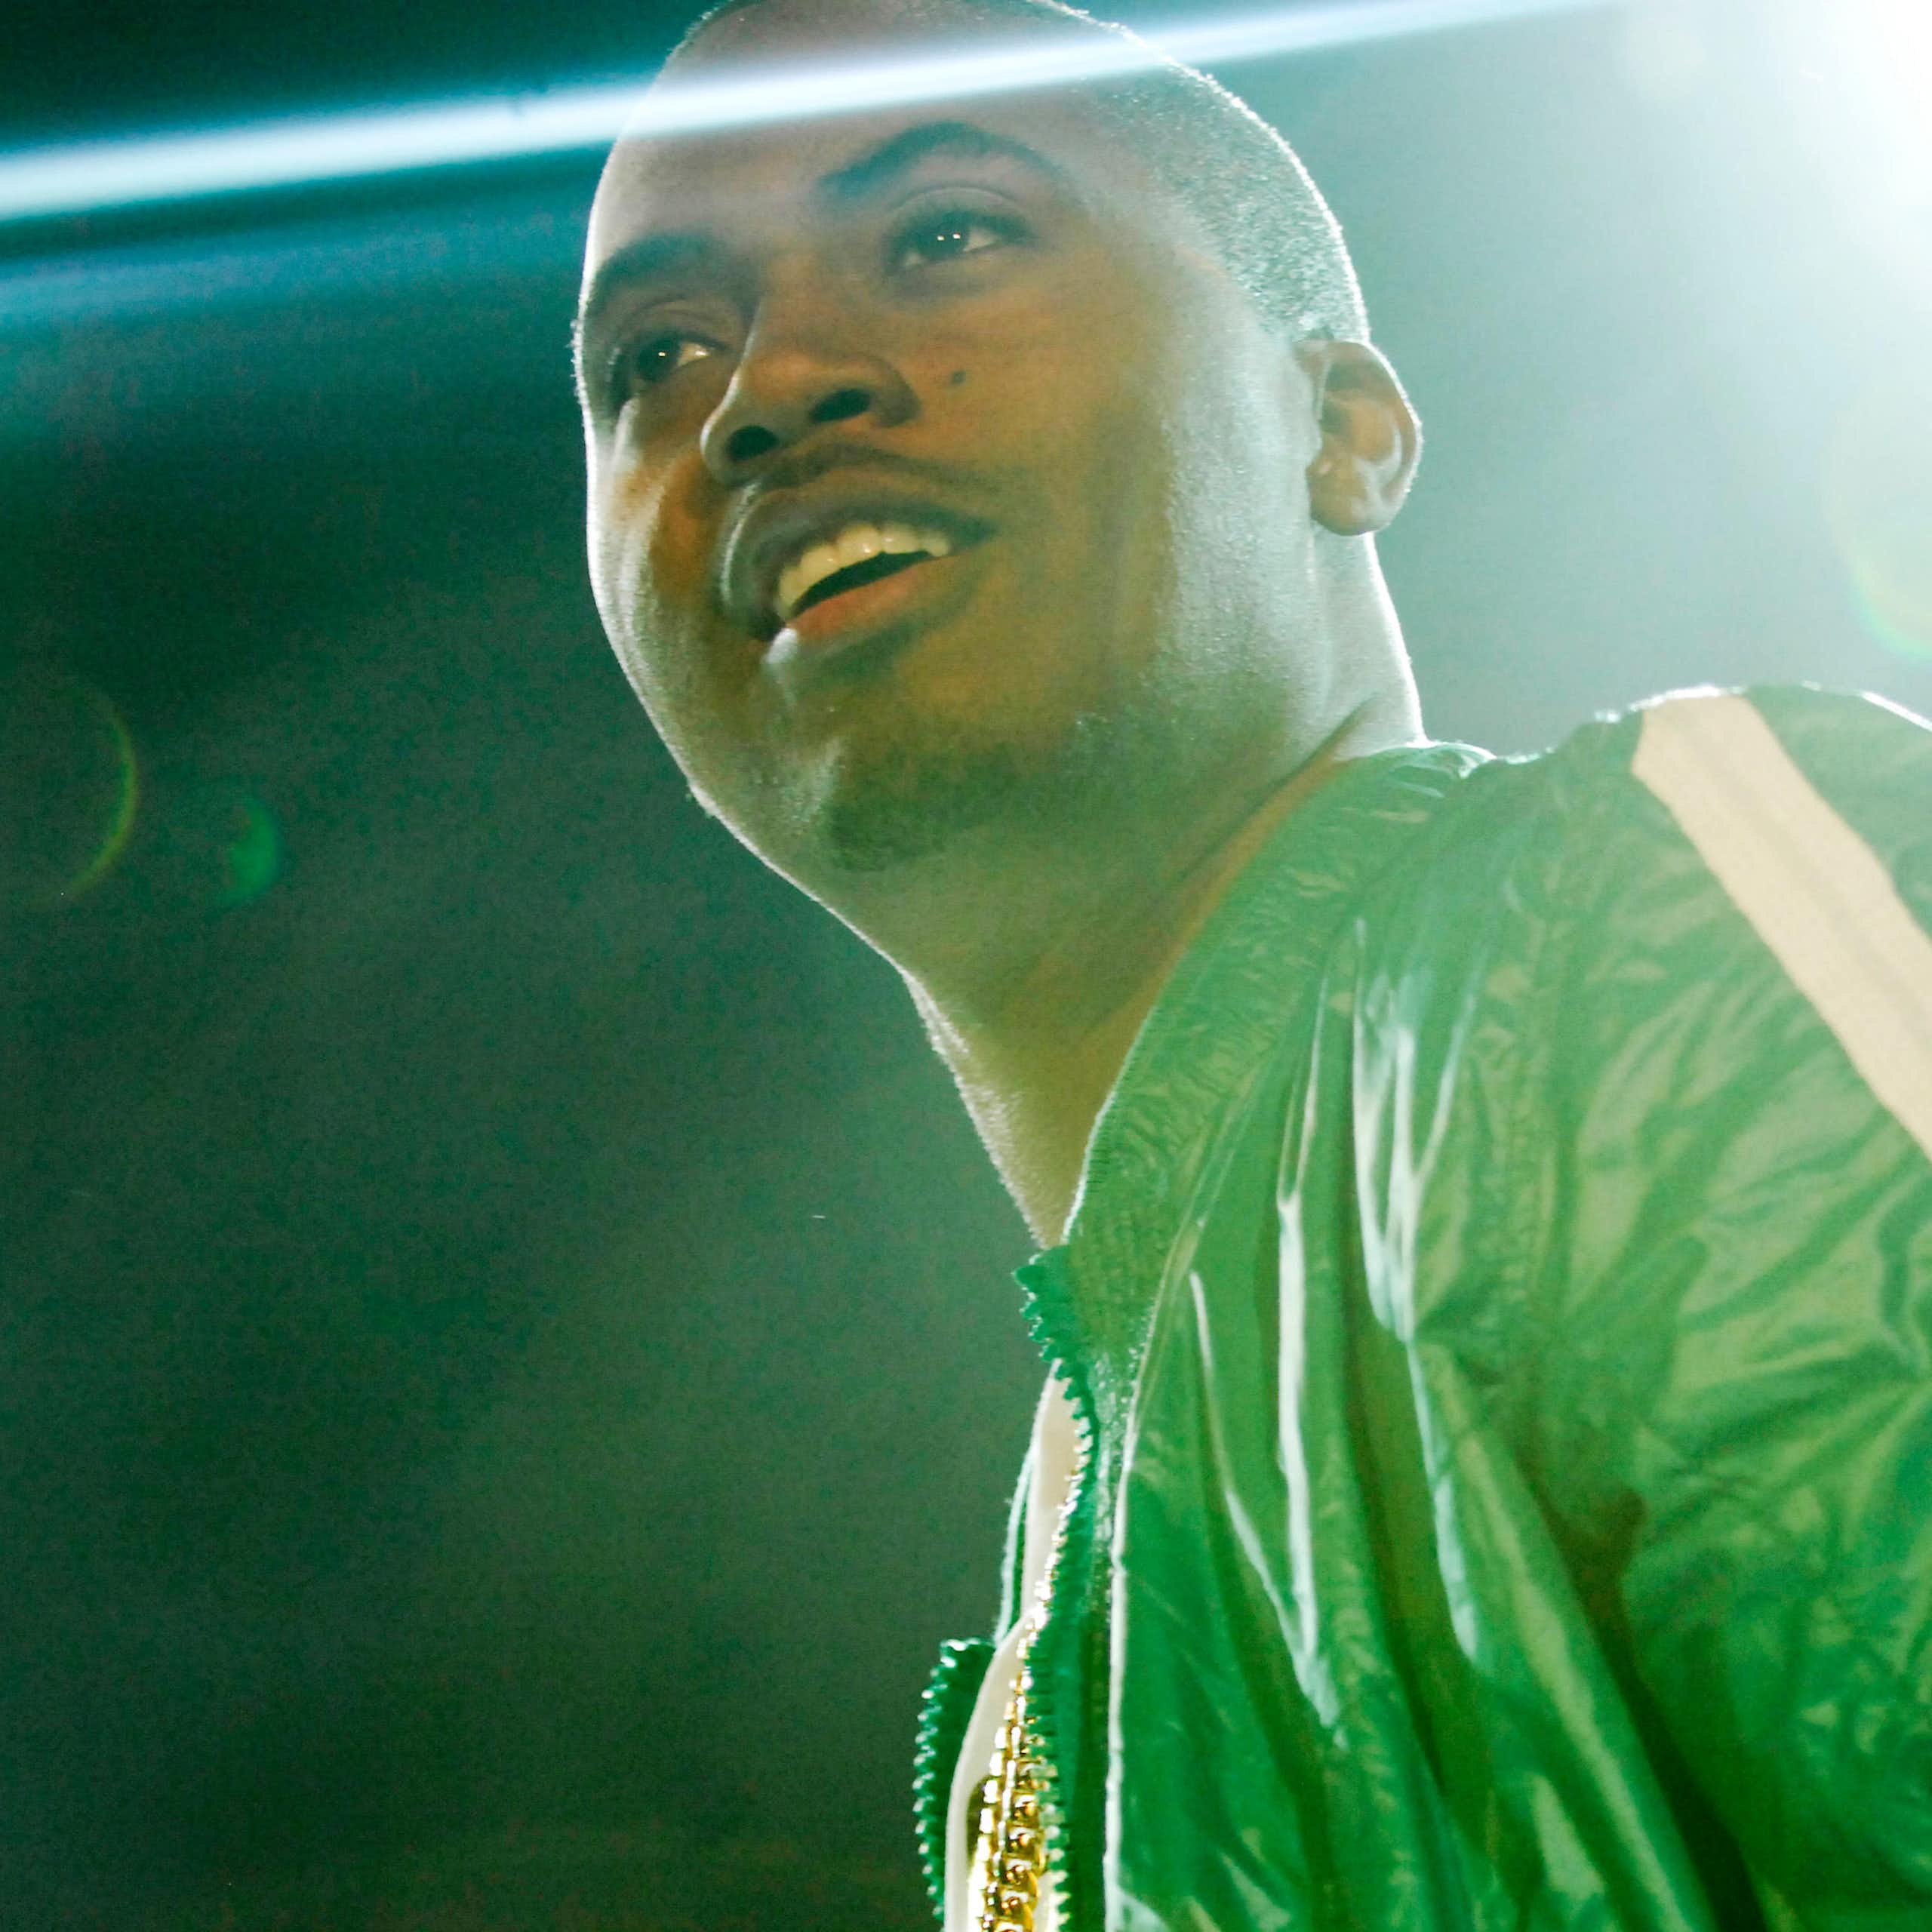 Nas on stage in a green jacket